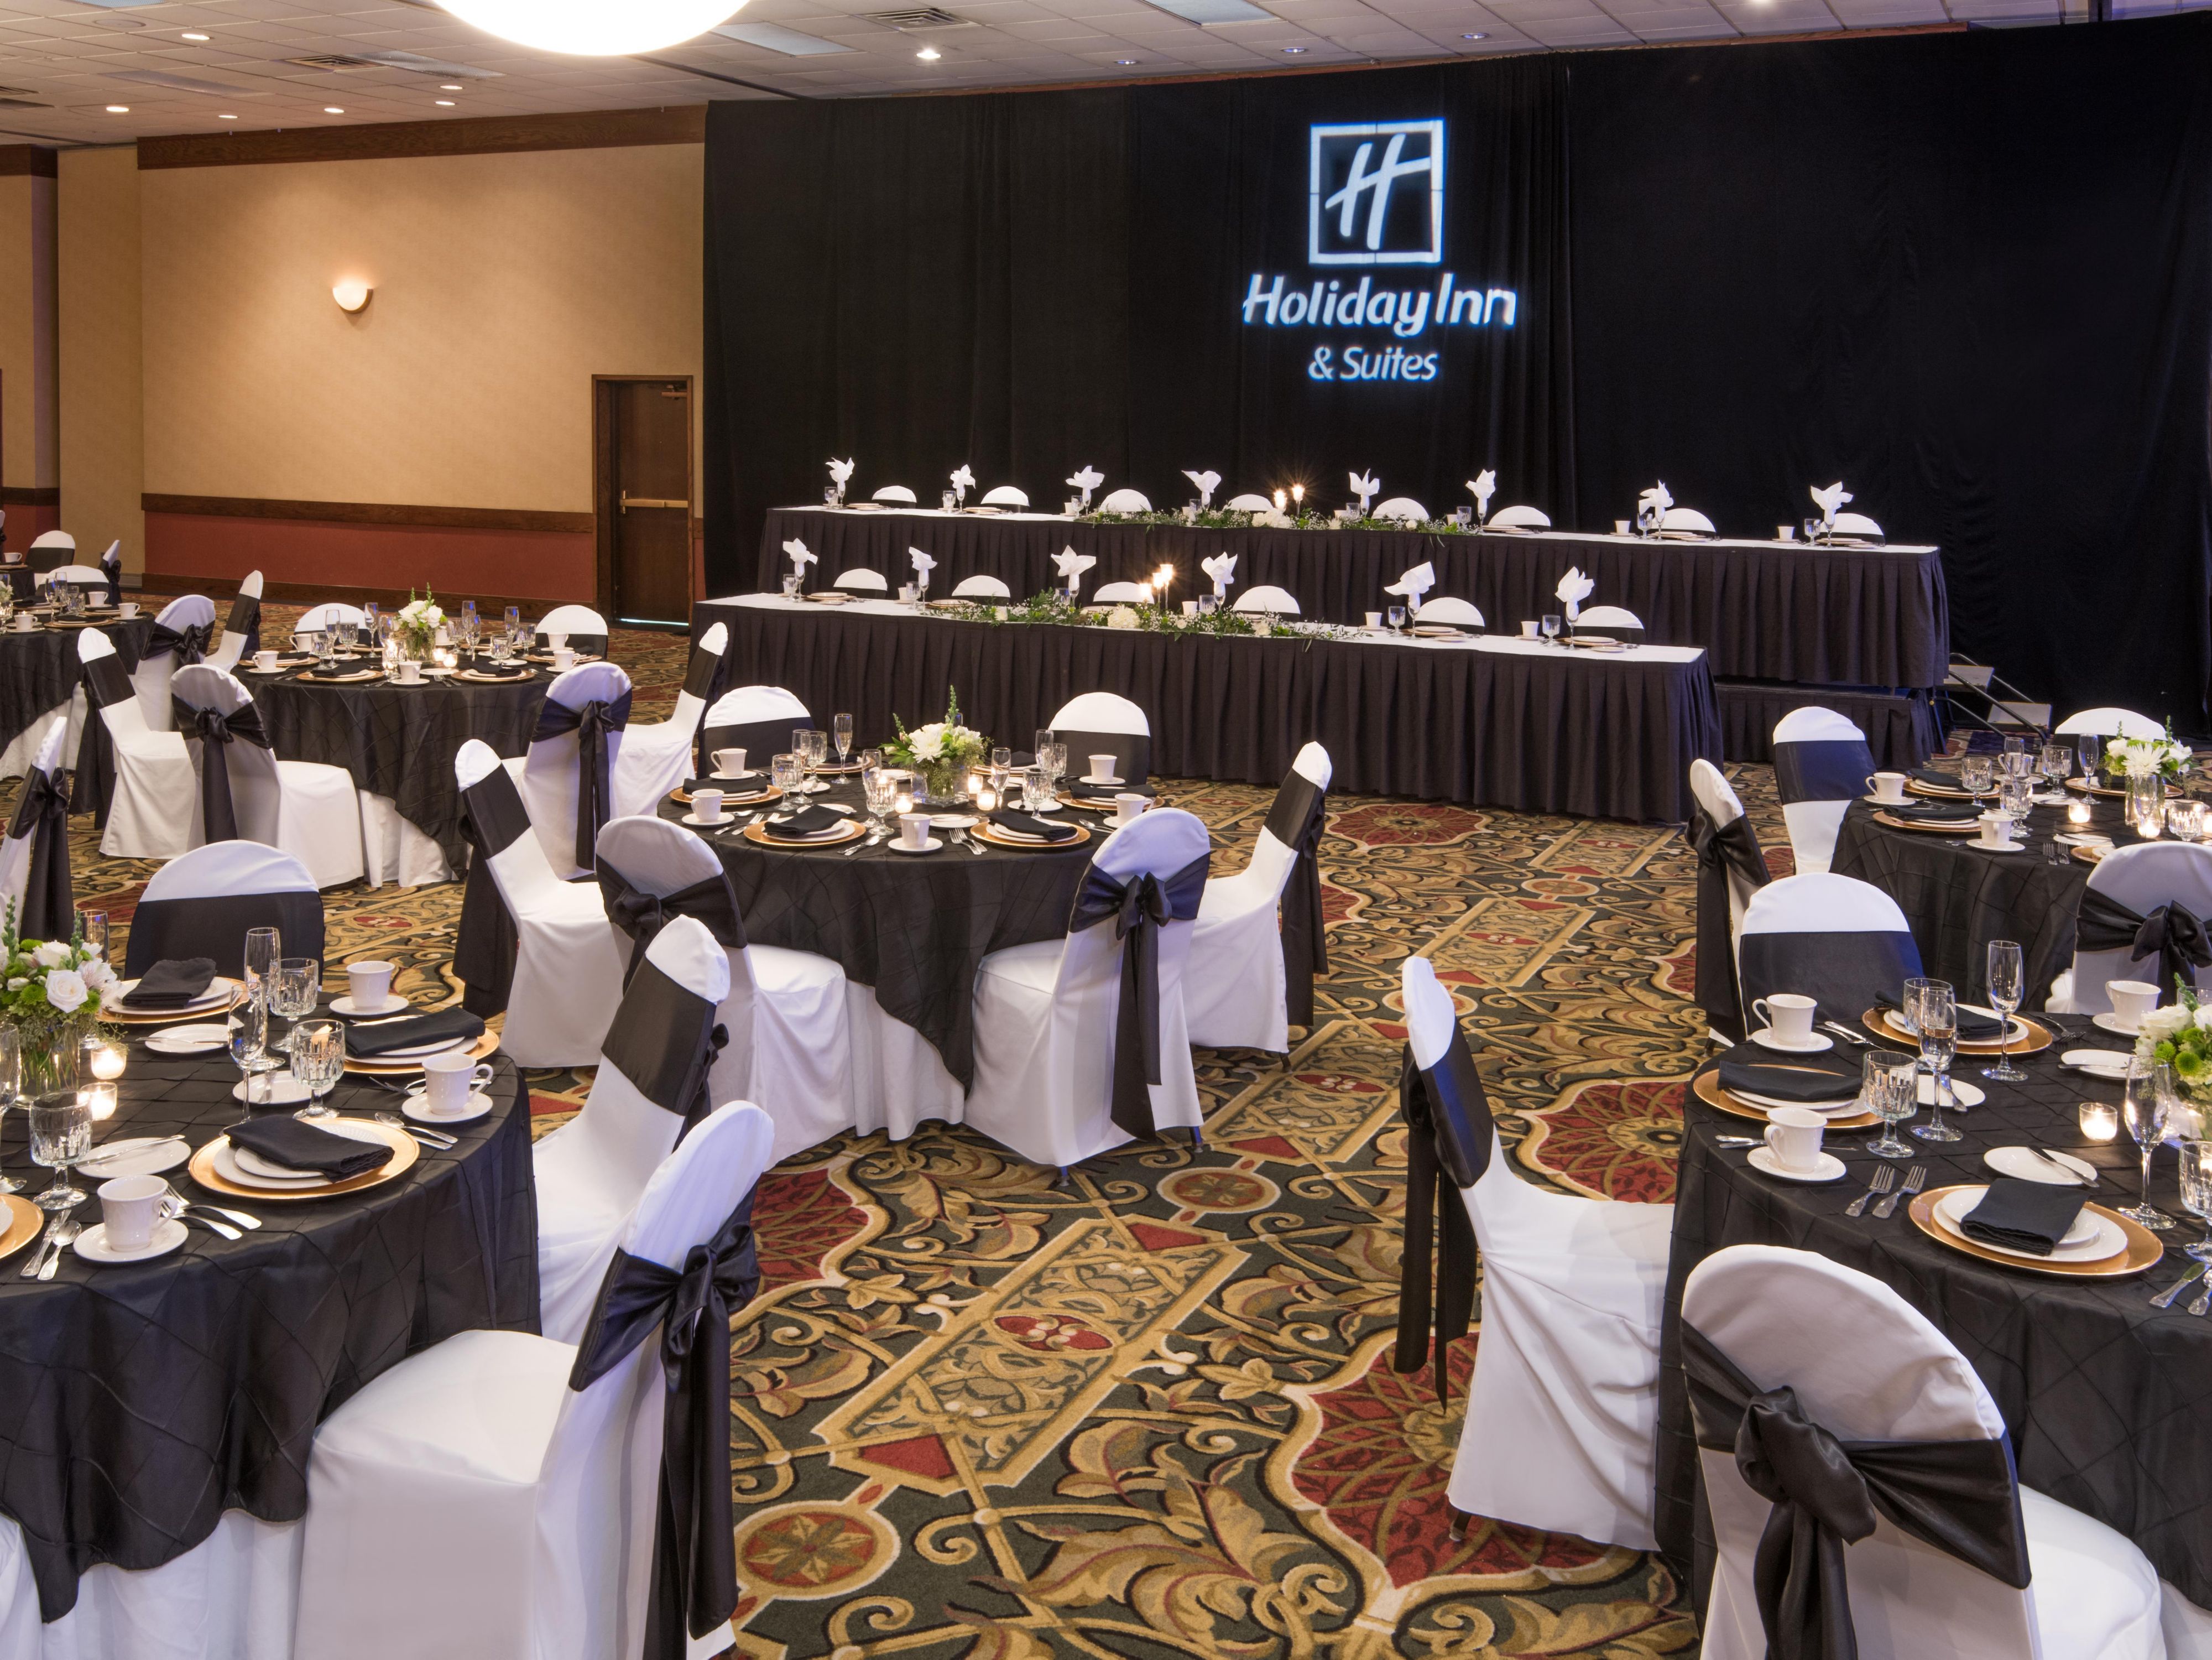 Successful meetings in Cincinnati, Ohio begin with the hotel's 14 updated meeting rooms. With more than 13,000 sq ft, host a reception for 1,000 and be assured that you'll have state-of-the-art A/V service, custom catering and our staff's best efforts.